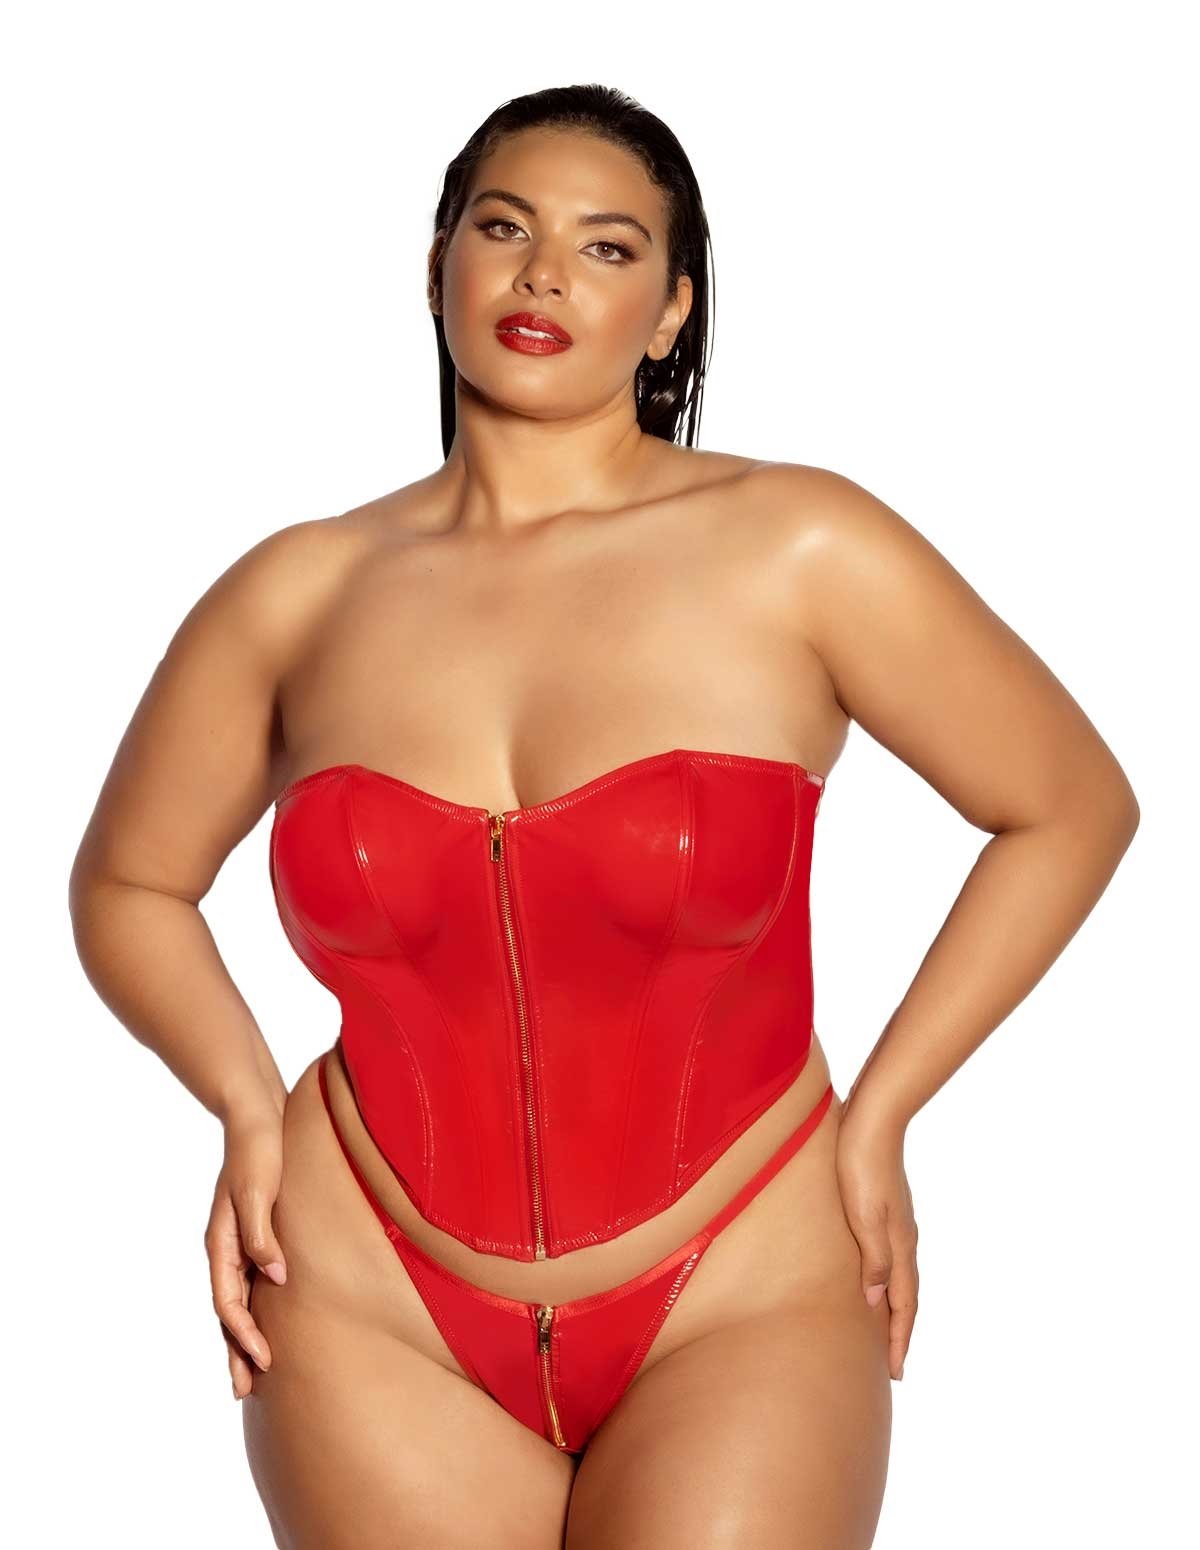 alternate image for Rider Plus Size Vinyl Bustier With Zipper Closure